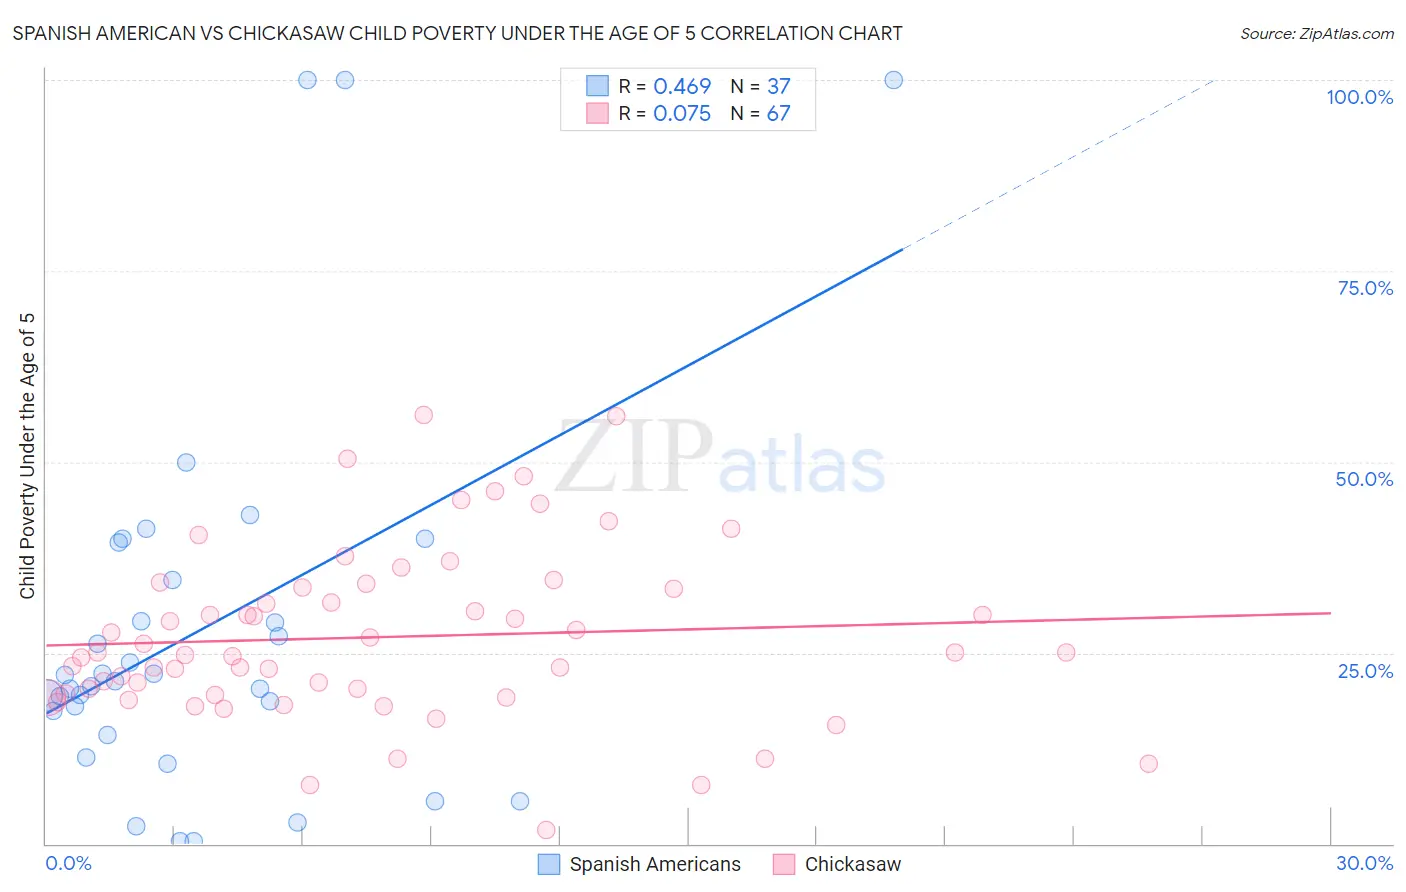 Spanish American vs Chickasaw Child Poverty Under the Age of 5